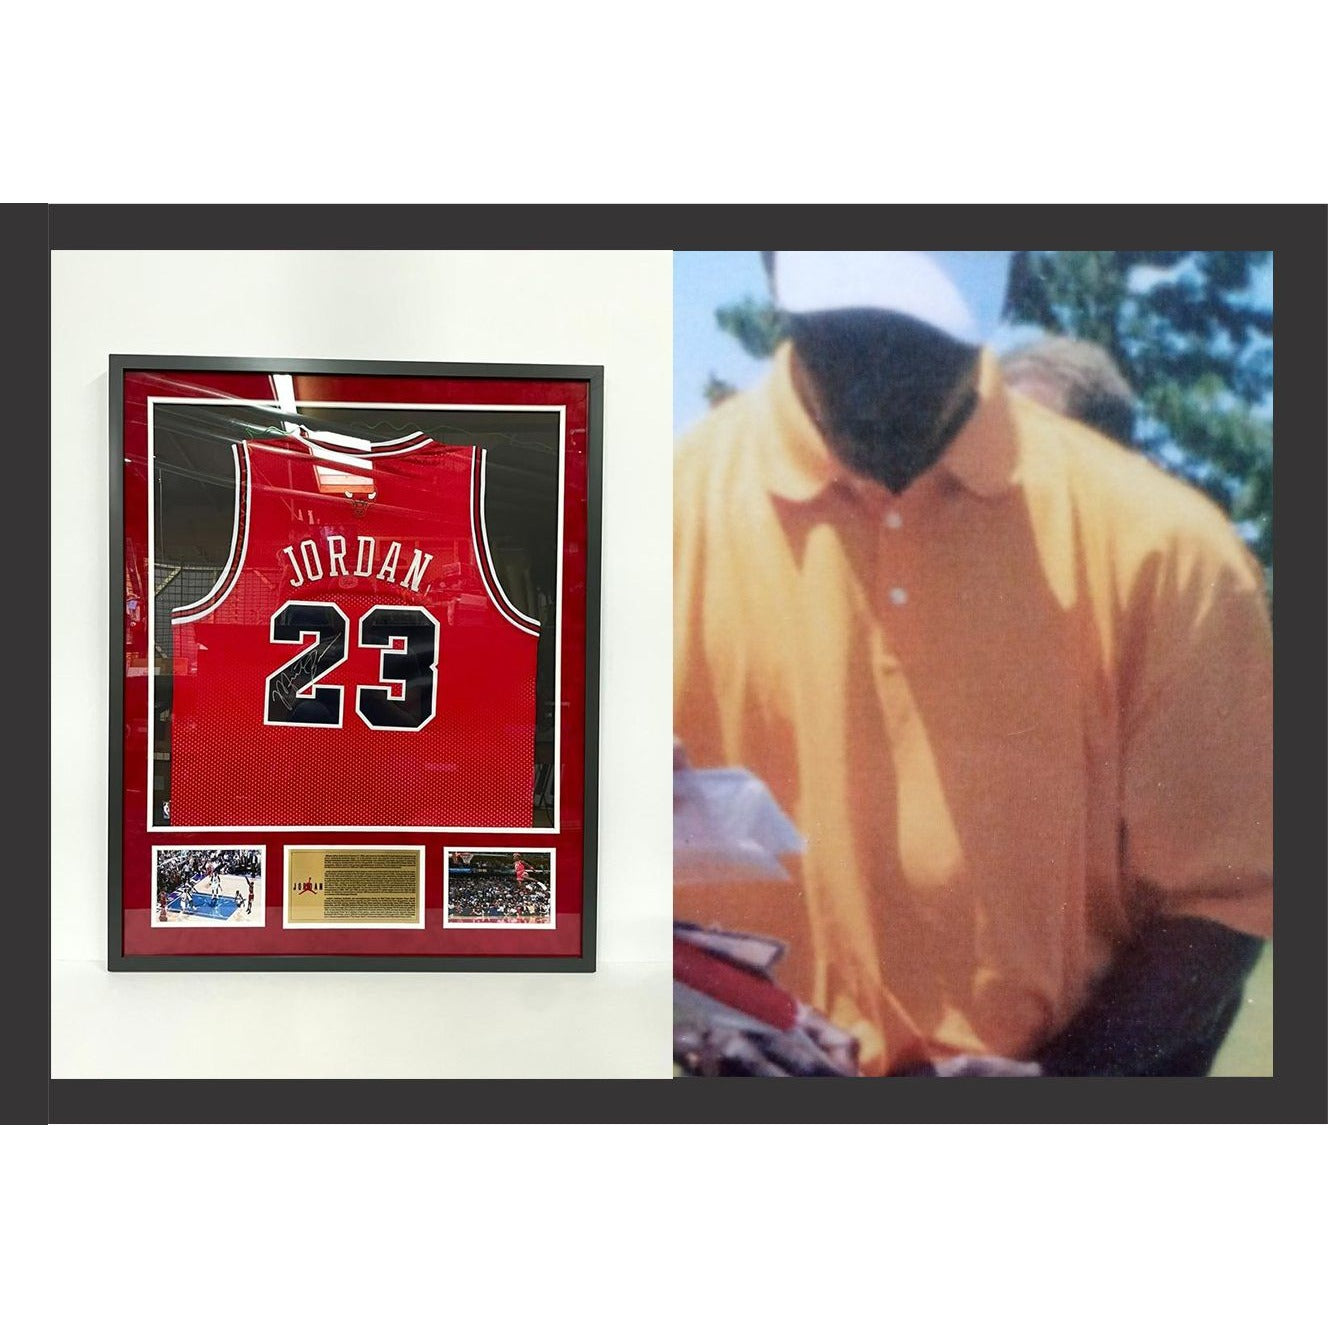 Michael Jordan 1984 Chicago Bulls size 2x game model Jersey signed with proof